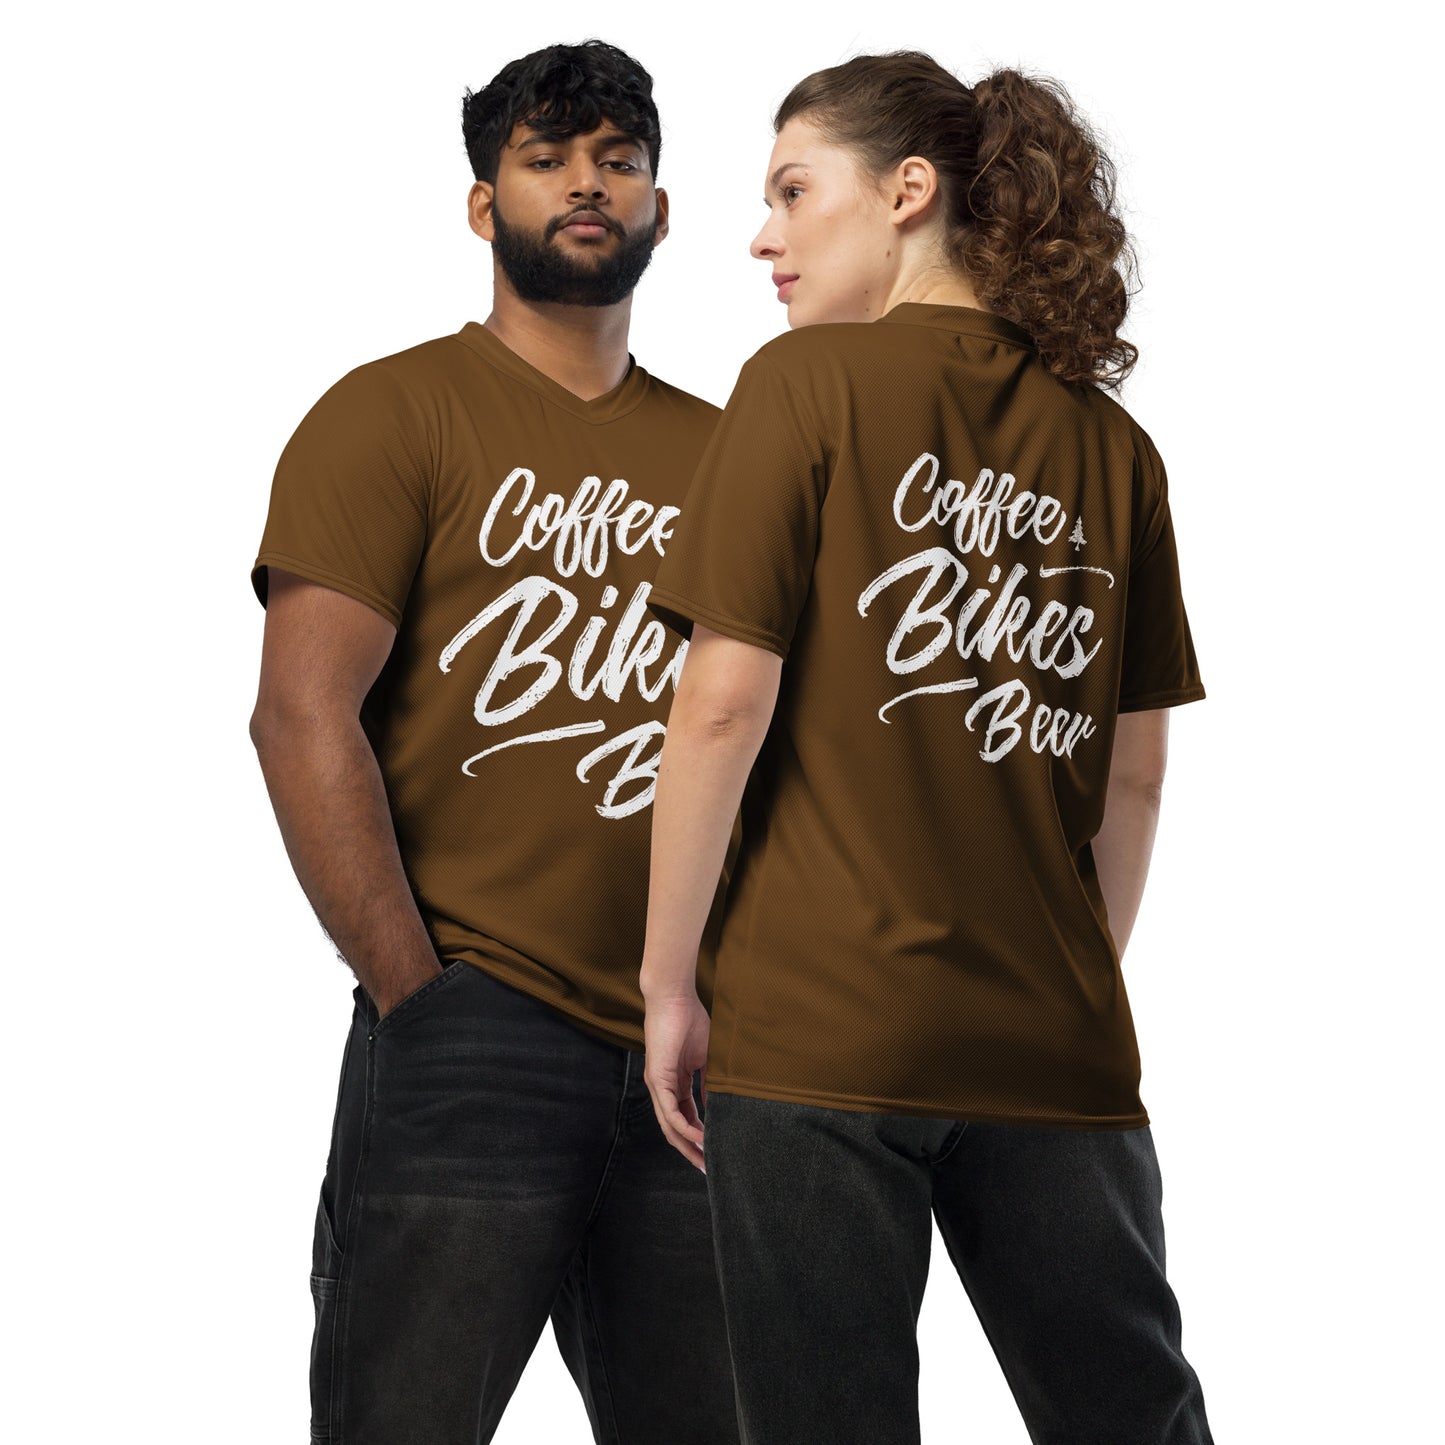 Coffee Bikes Beer Recycled Jersey - Unisex